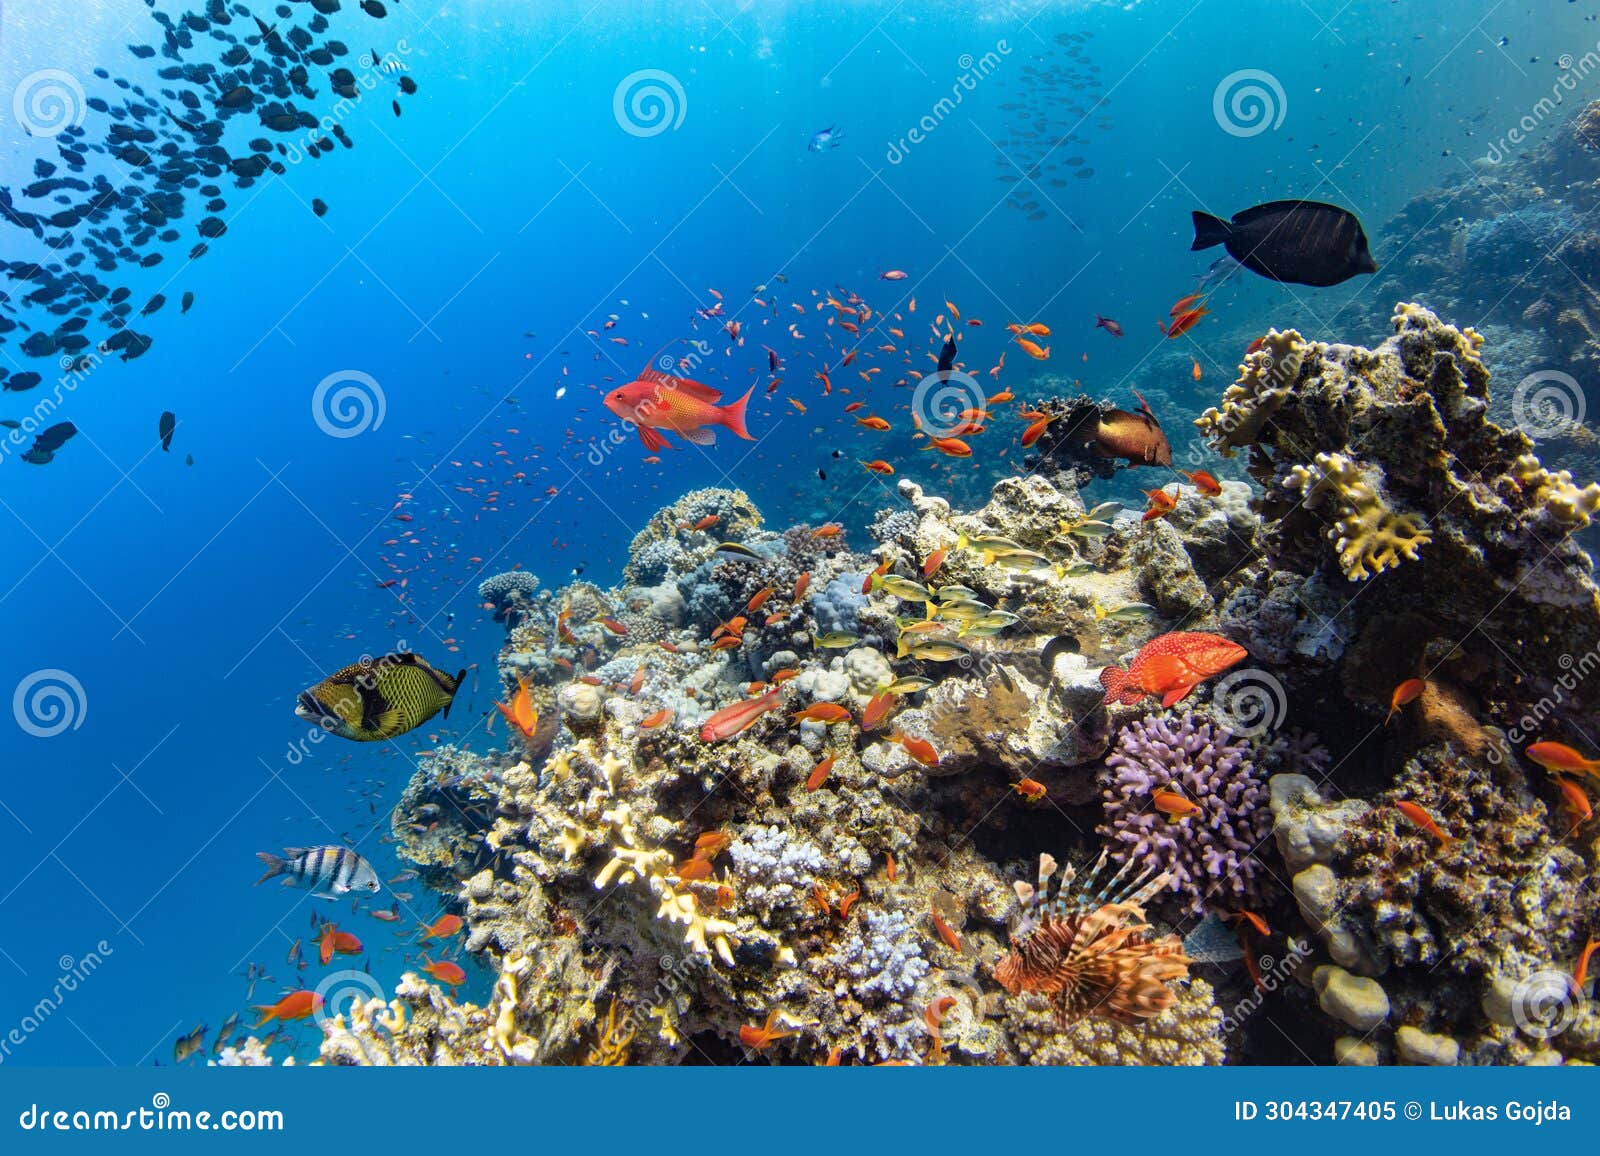 Underwater Tropical Corals Reef with Colorful Sea Fish Stock Image ...